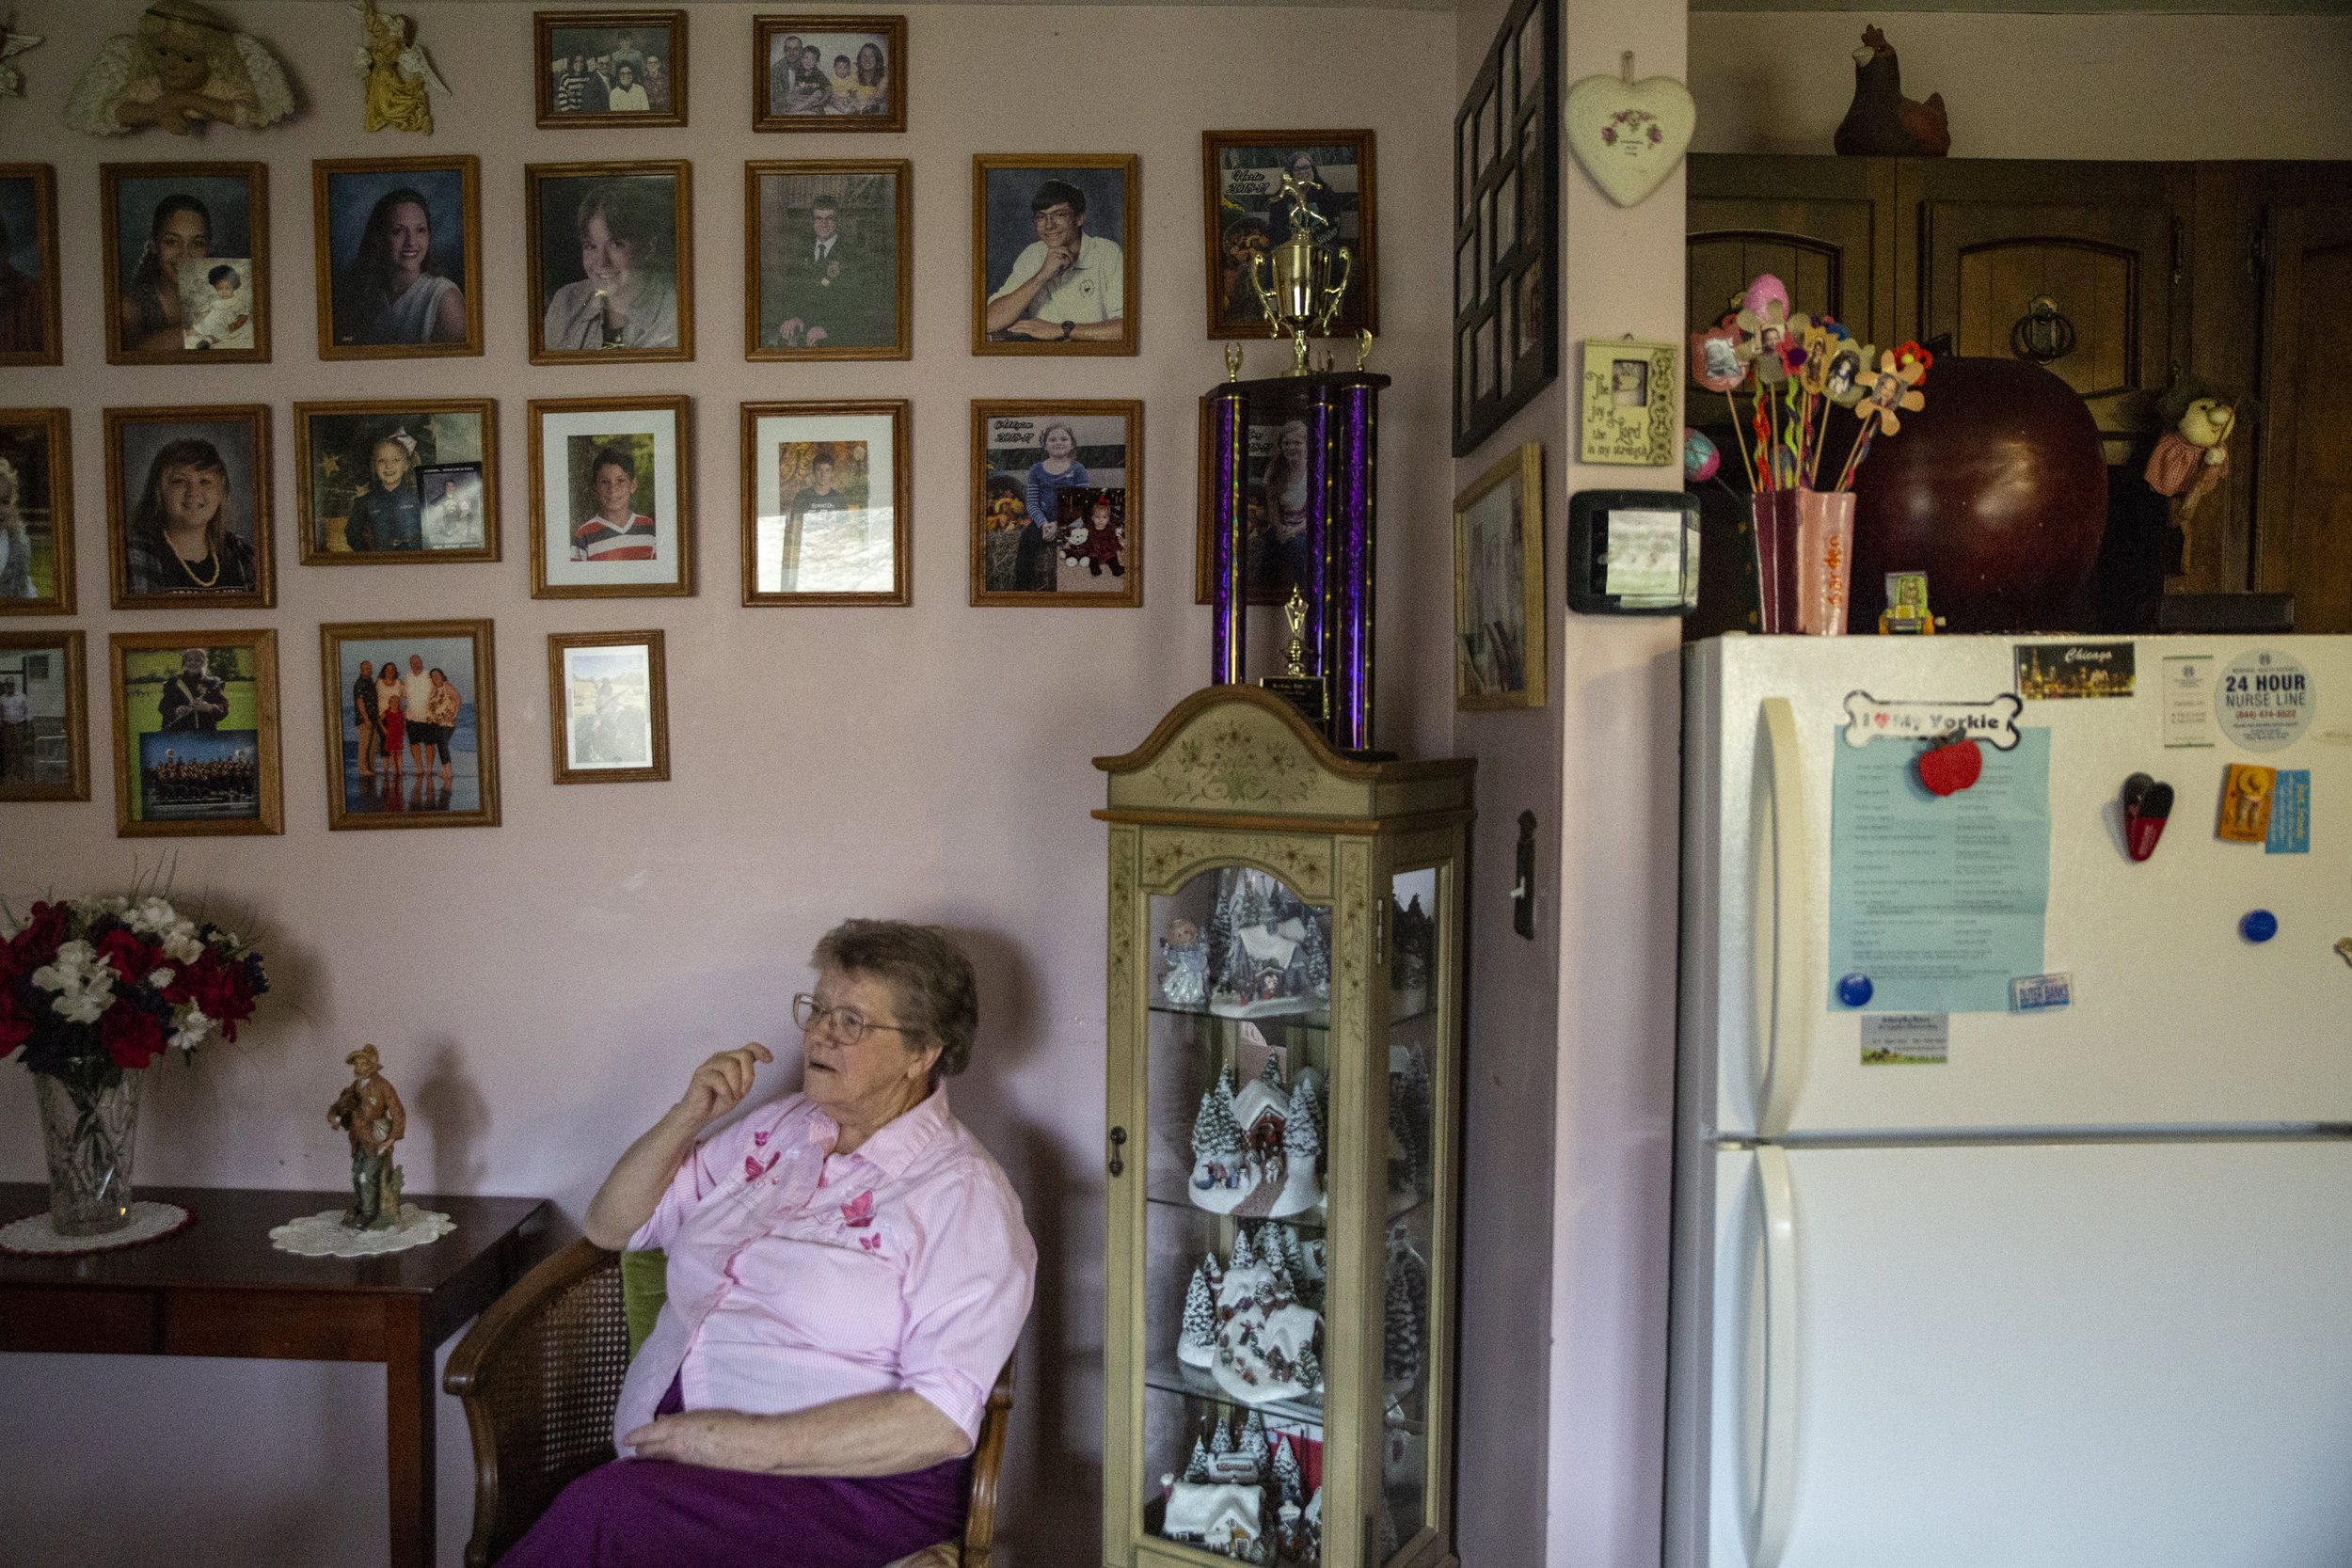  At 80, Donna Russell is one of Sharpsburg’s oldest residents. Proximity to family is important to Donna, who lives on the same property as multiple family members, each with their own subdivision. 